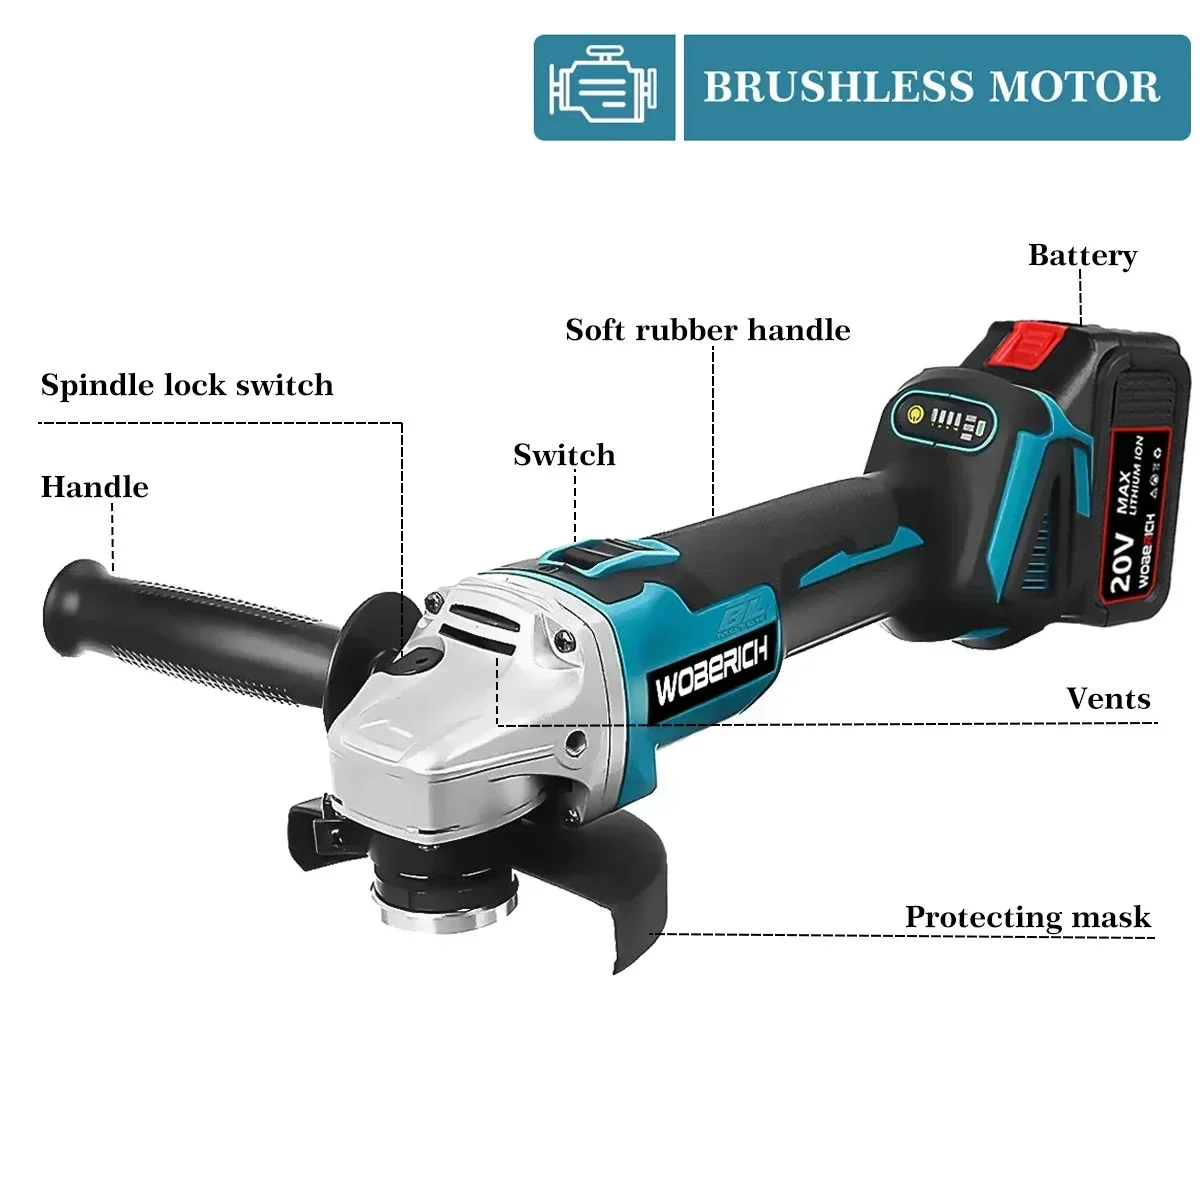 Combo Kits Power Tools Sets Brushless Electric Cordless Impact Drill Angle Grinder Electric circular saw With 2x Battery